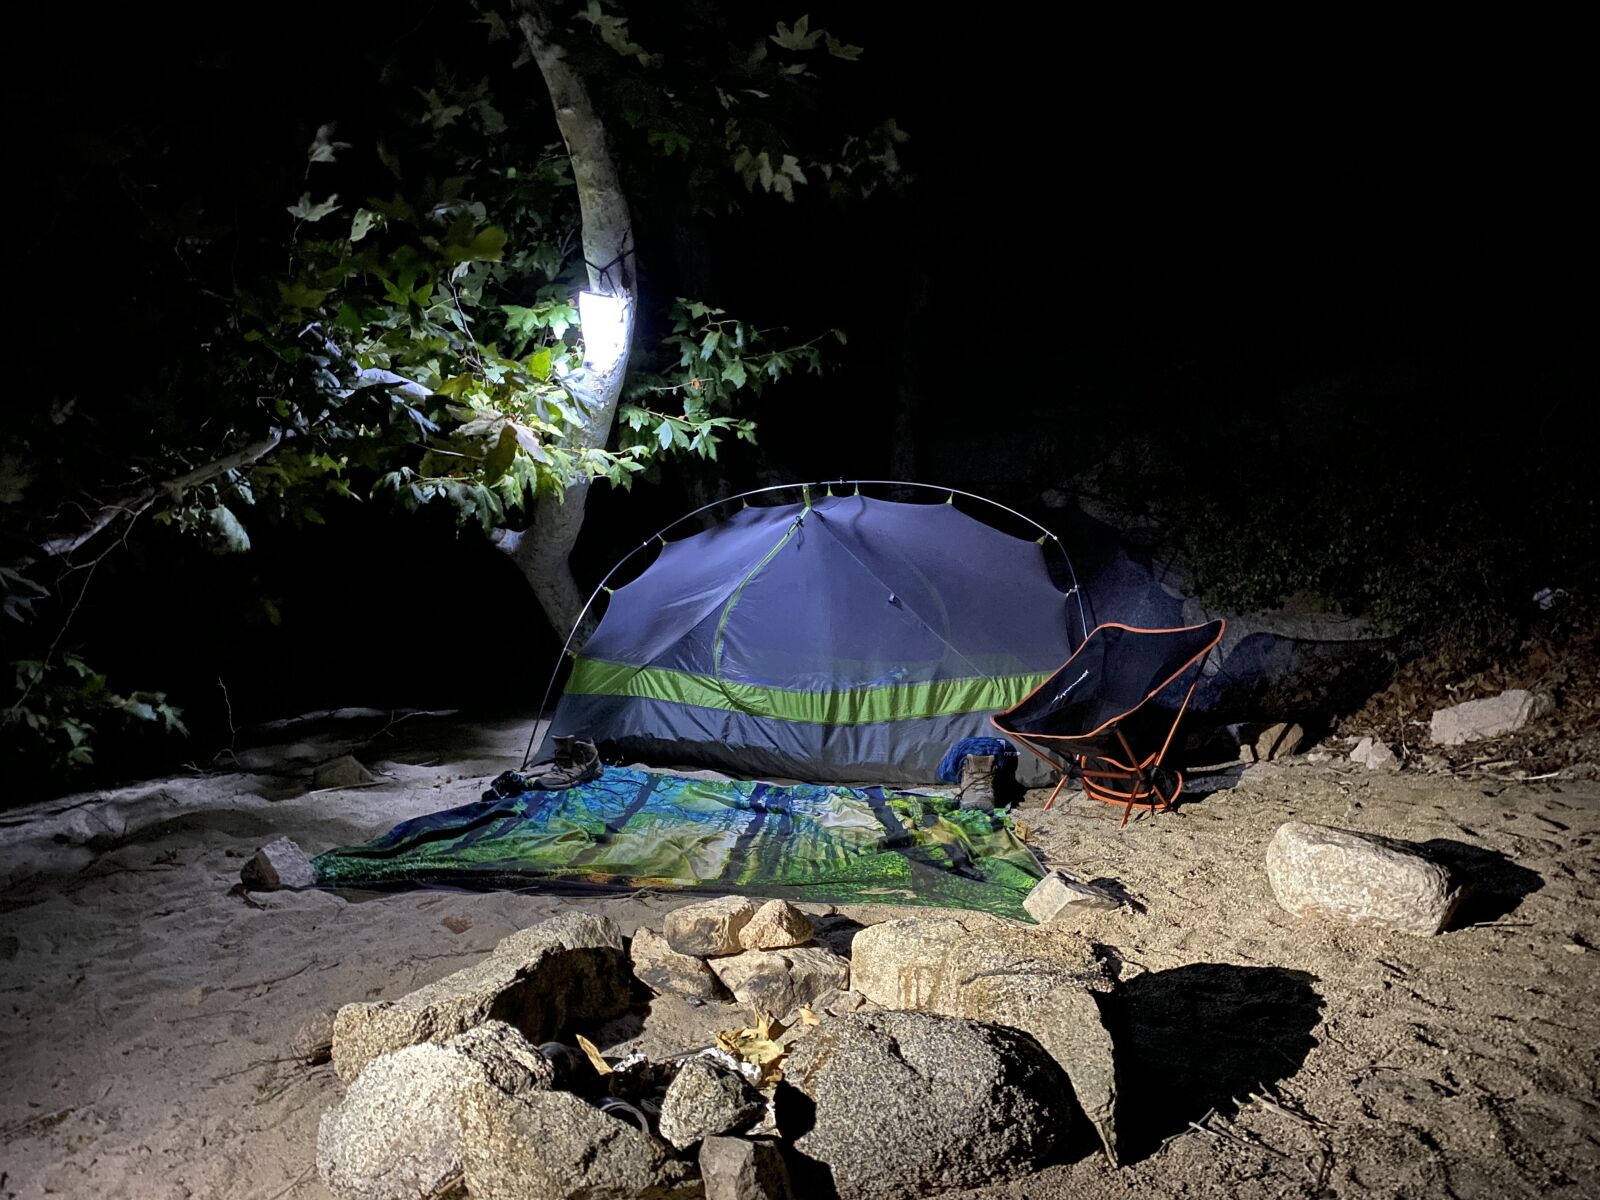 Apple iPhone 11 Pro + iPhone 11 Pro back triple camera 4.25mm f/1.8 sample photo. Campsite, tent, camping photography